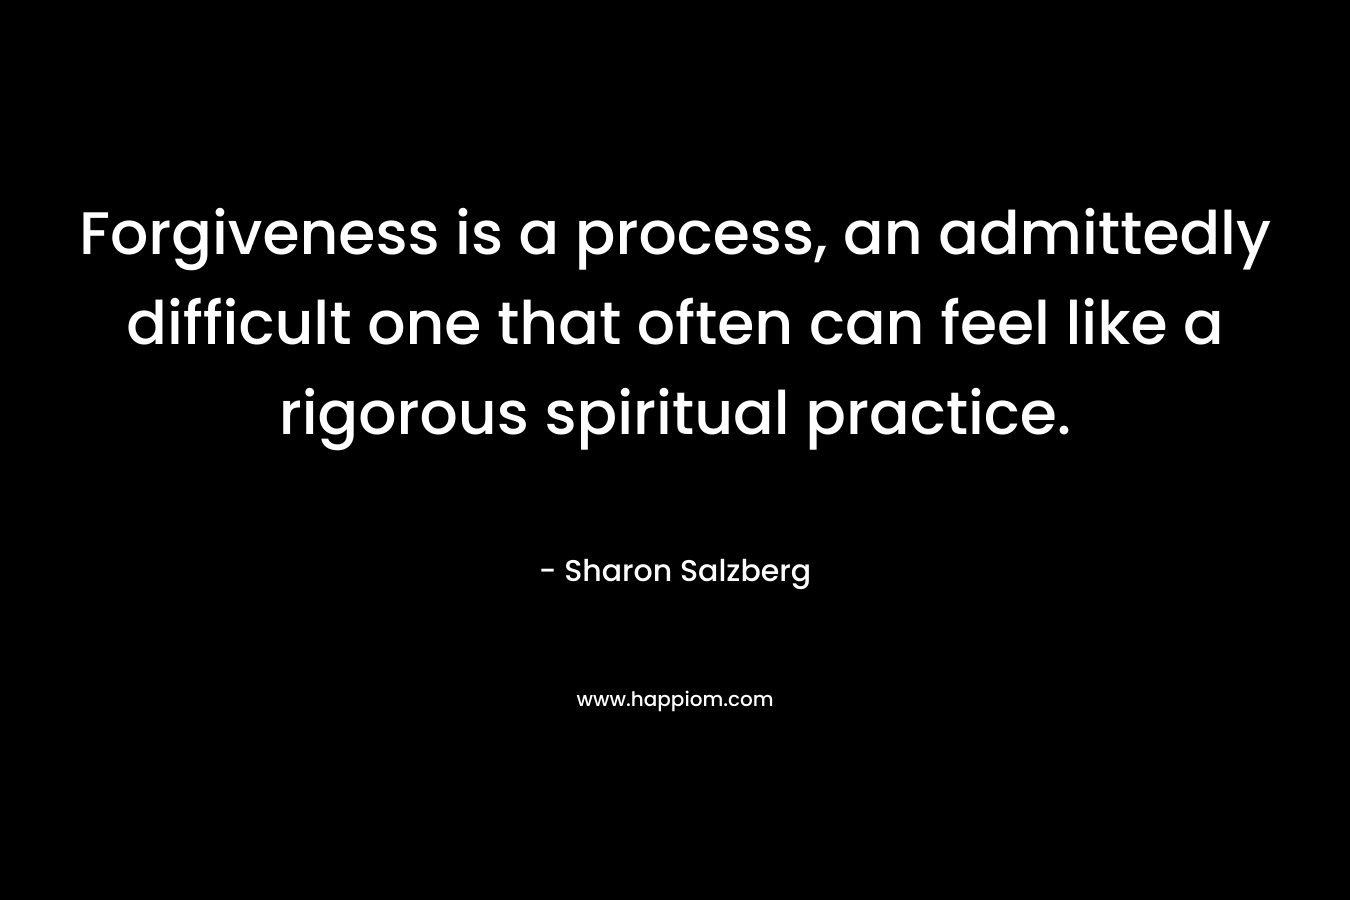 Forgiveness is a process, an admittedly difficult one that often can feel like a rigorous spiritual practice.